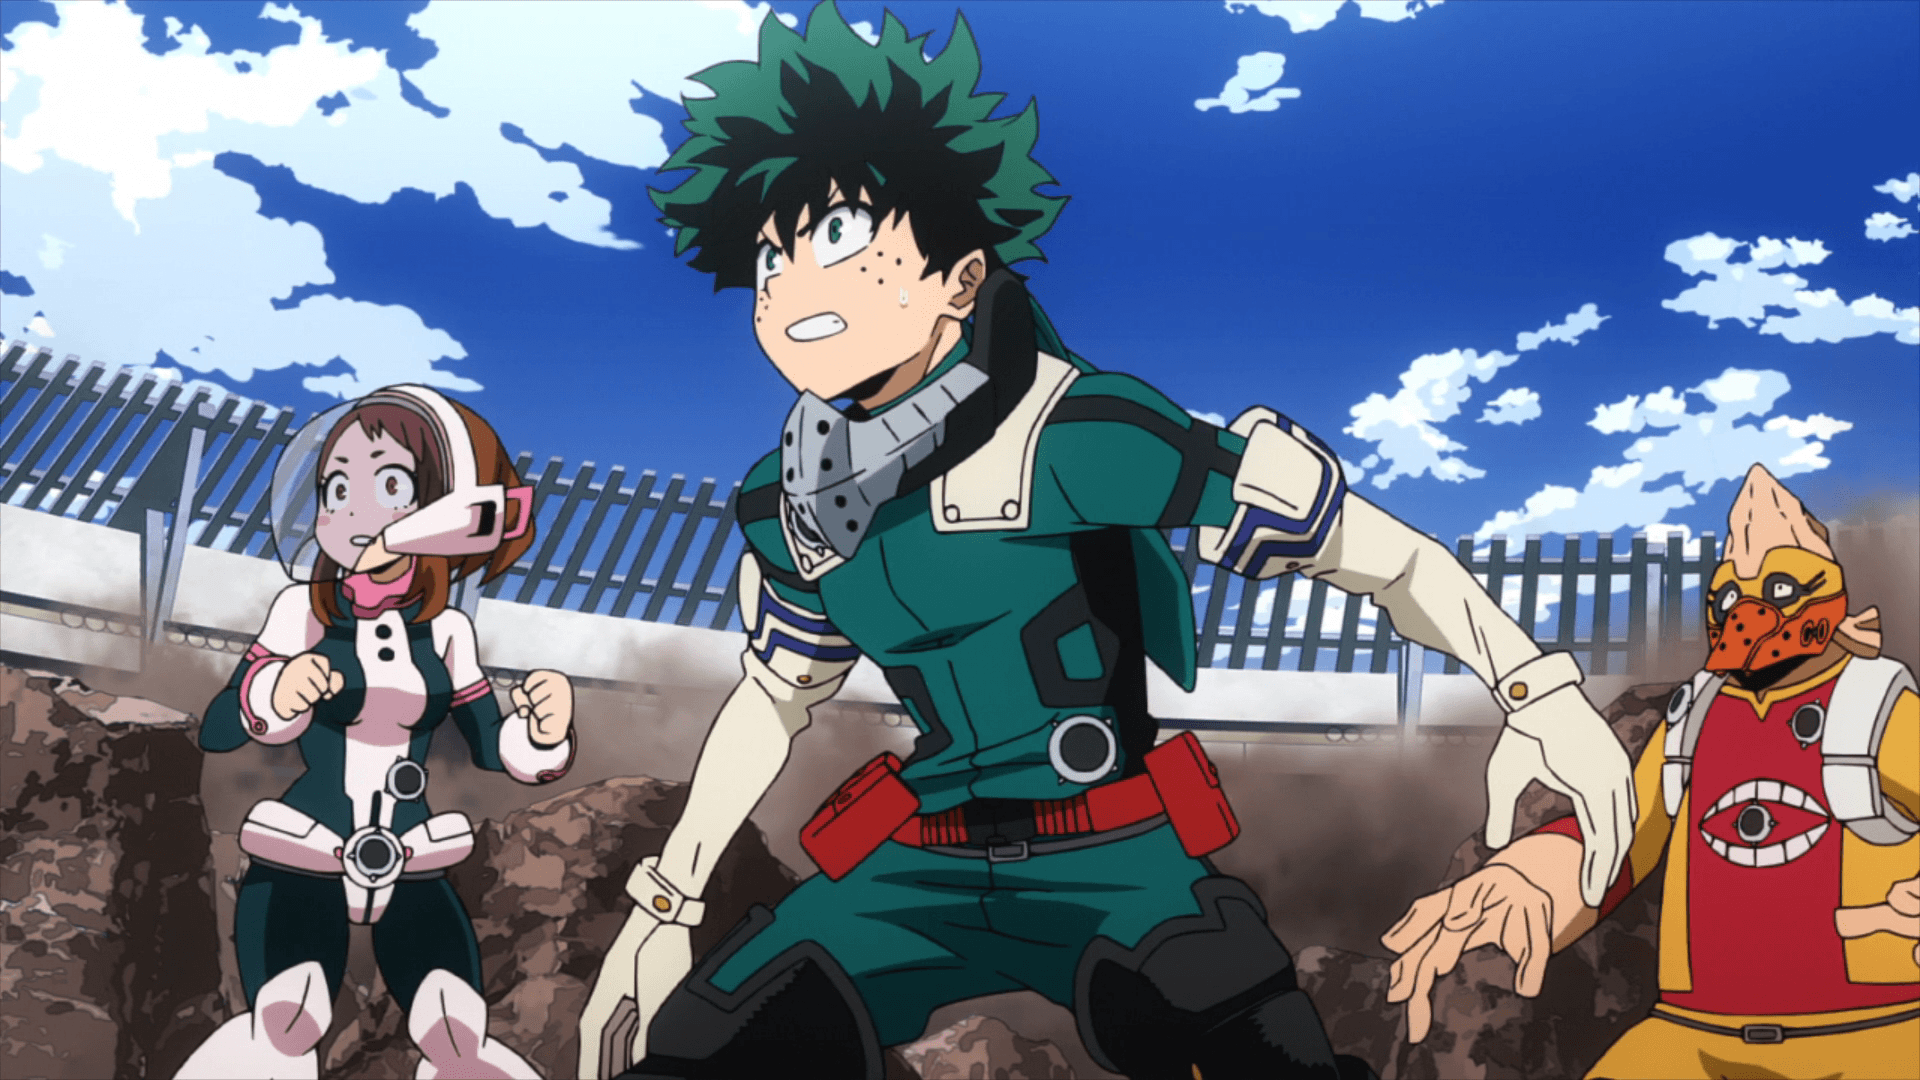 MY HERO ACADEMIA Celebrates Its 5th Anniversary With Color